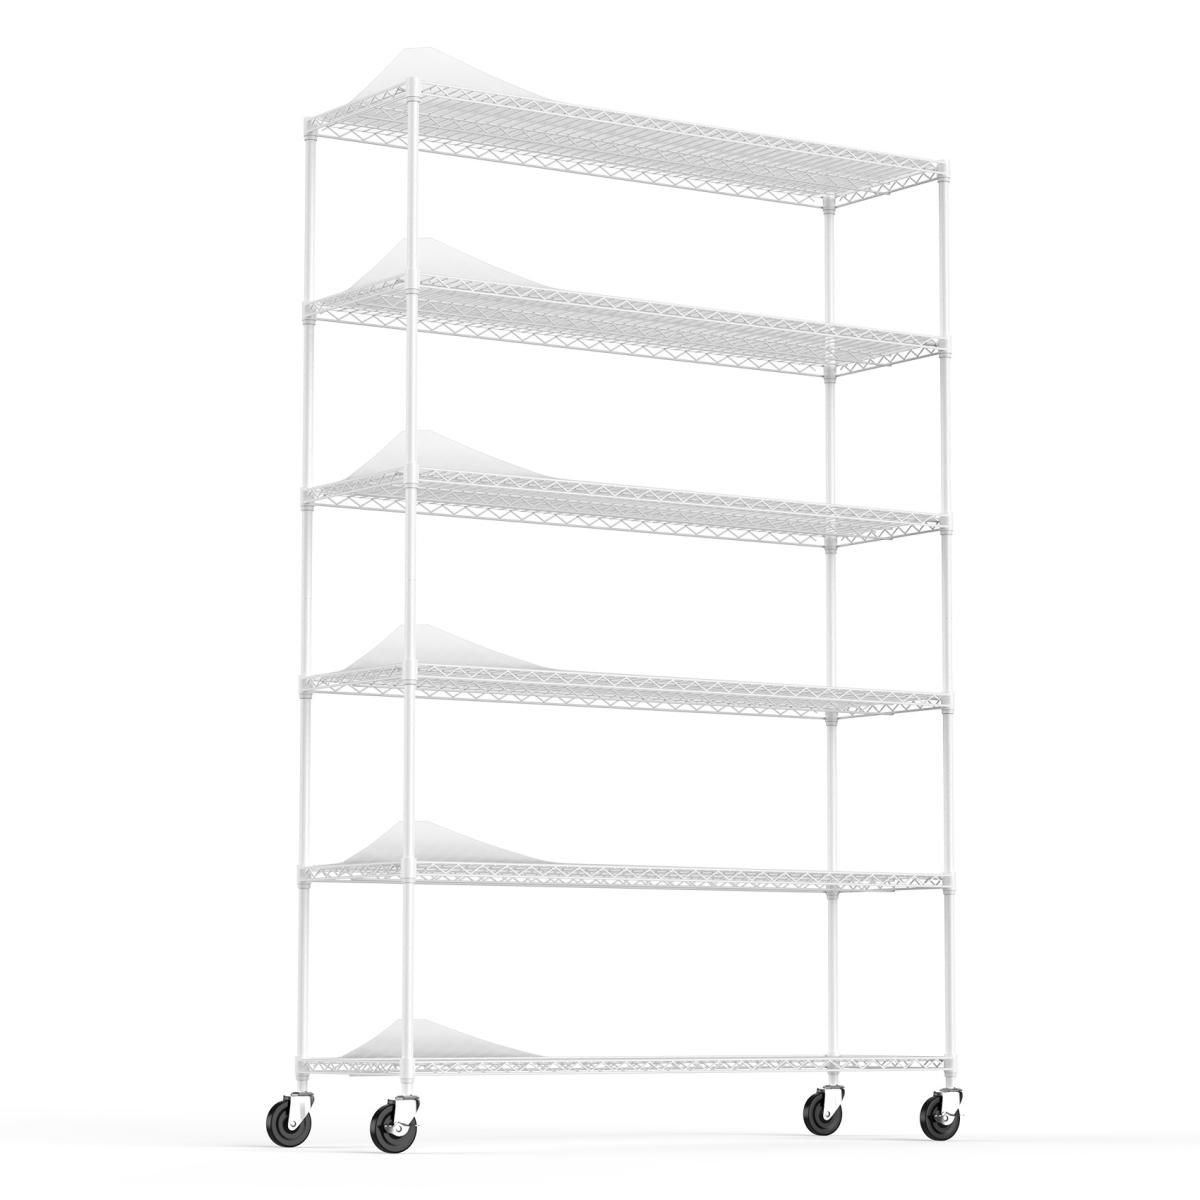 6 Tier Wire Shelving Unit, 6000 Lbs Nsf Height Adjustable Metal Garage Storage Shelves with Wheels, Heavy Duty Storage Wire Rack Metal Shelves - White